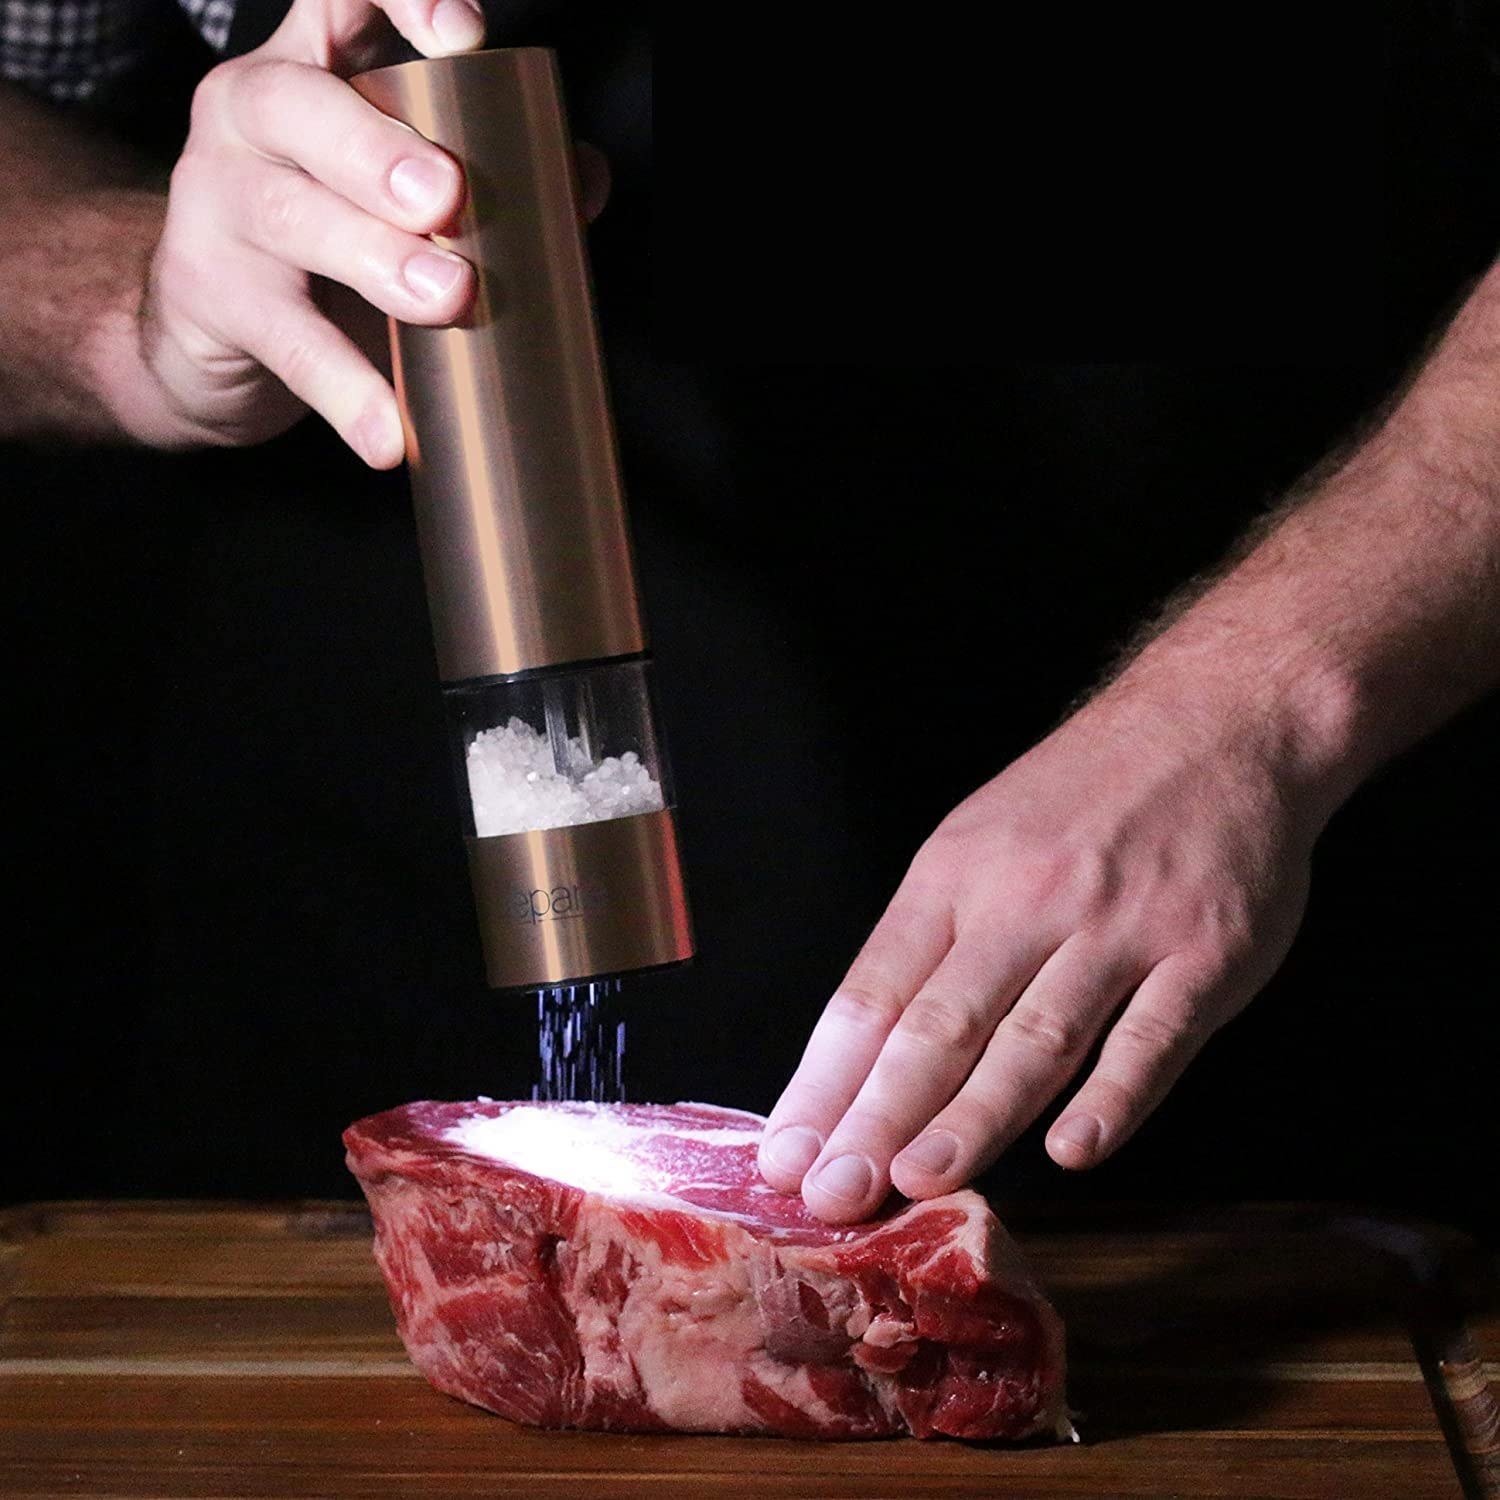 A person grinds salt onto a thick slab of steak